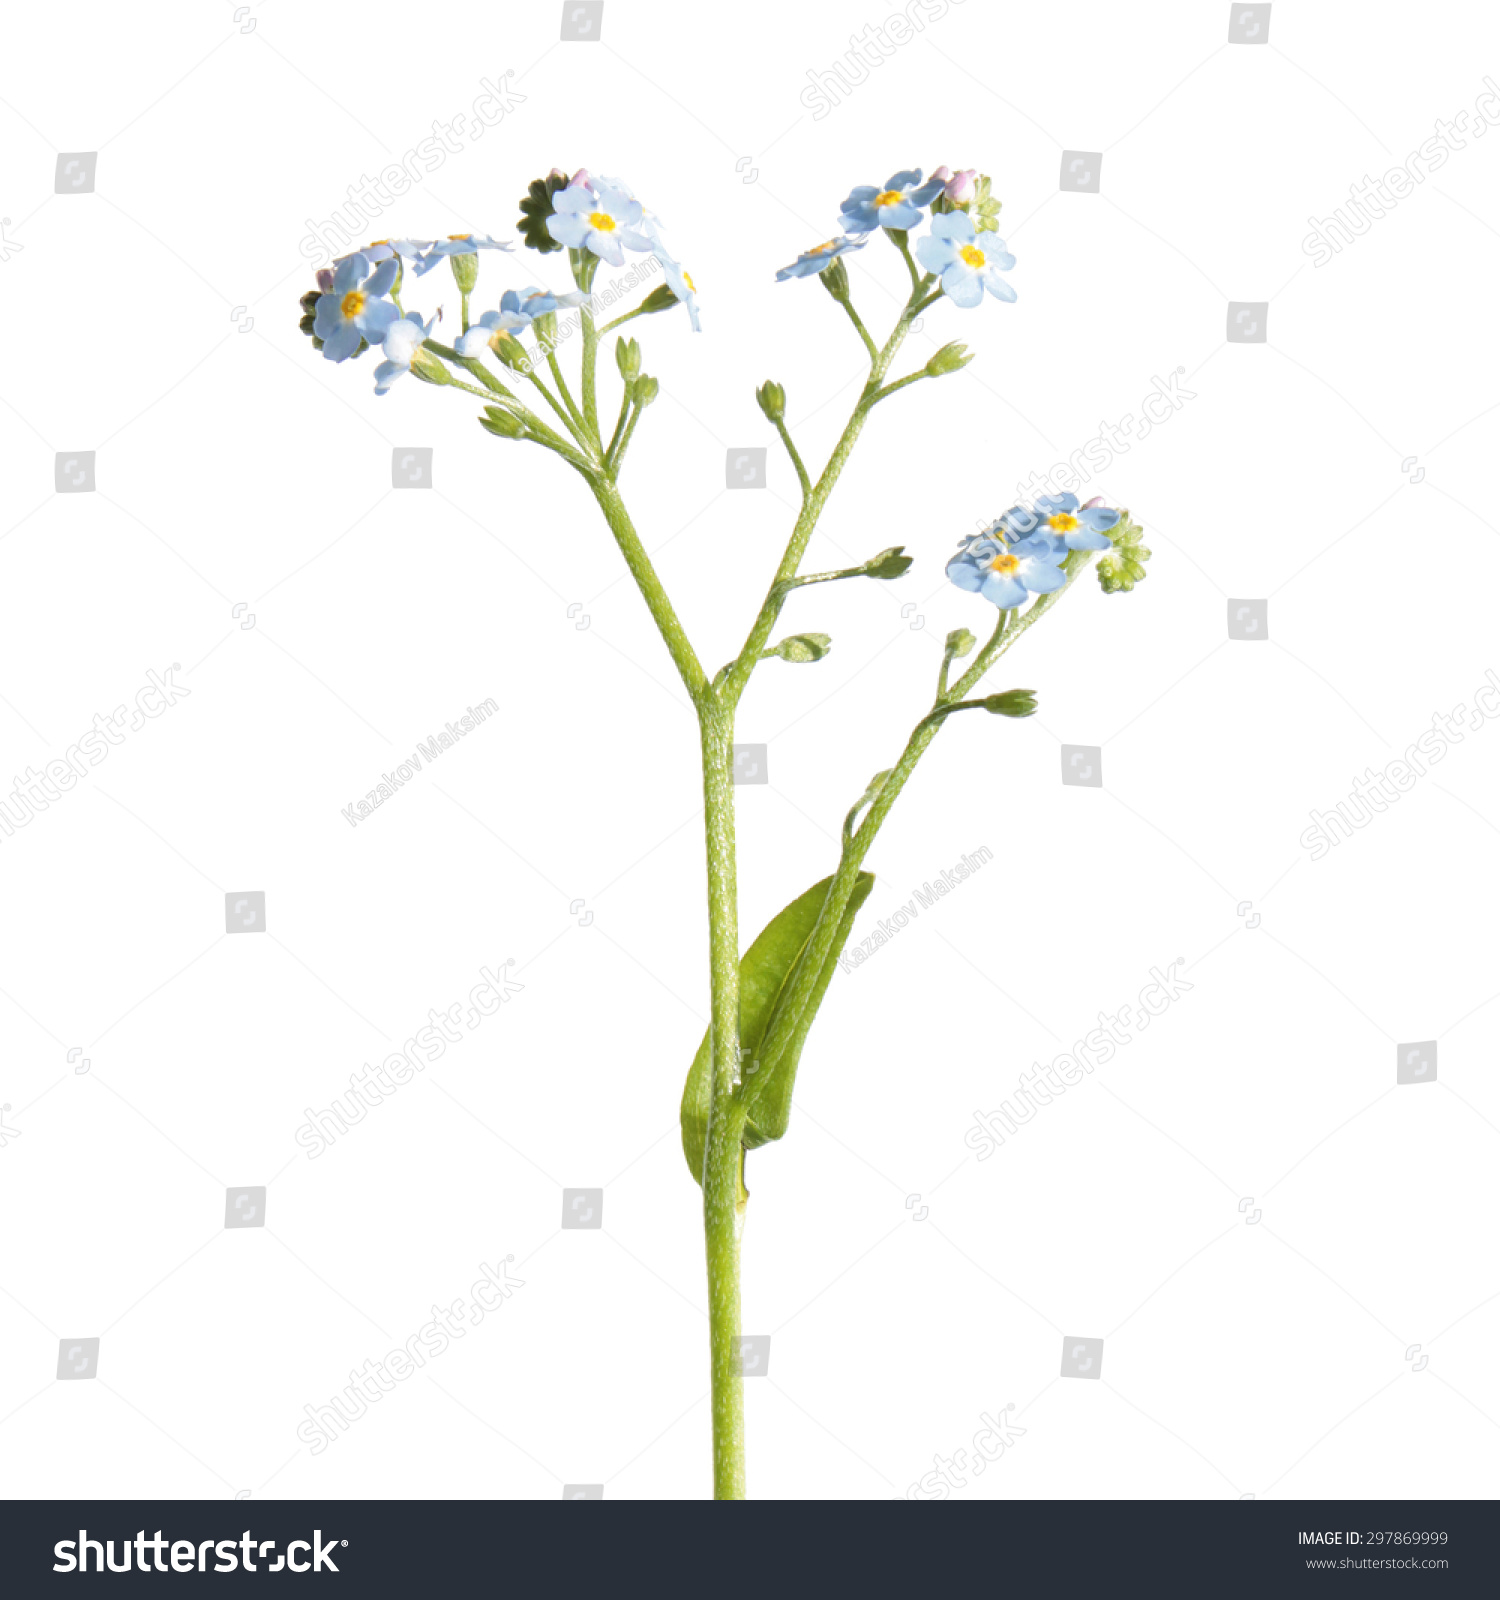 Forget-Me-Not Flower Isolated On White Stock Photo 297869999 : Shutterstock